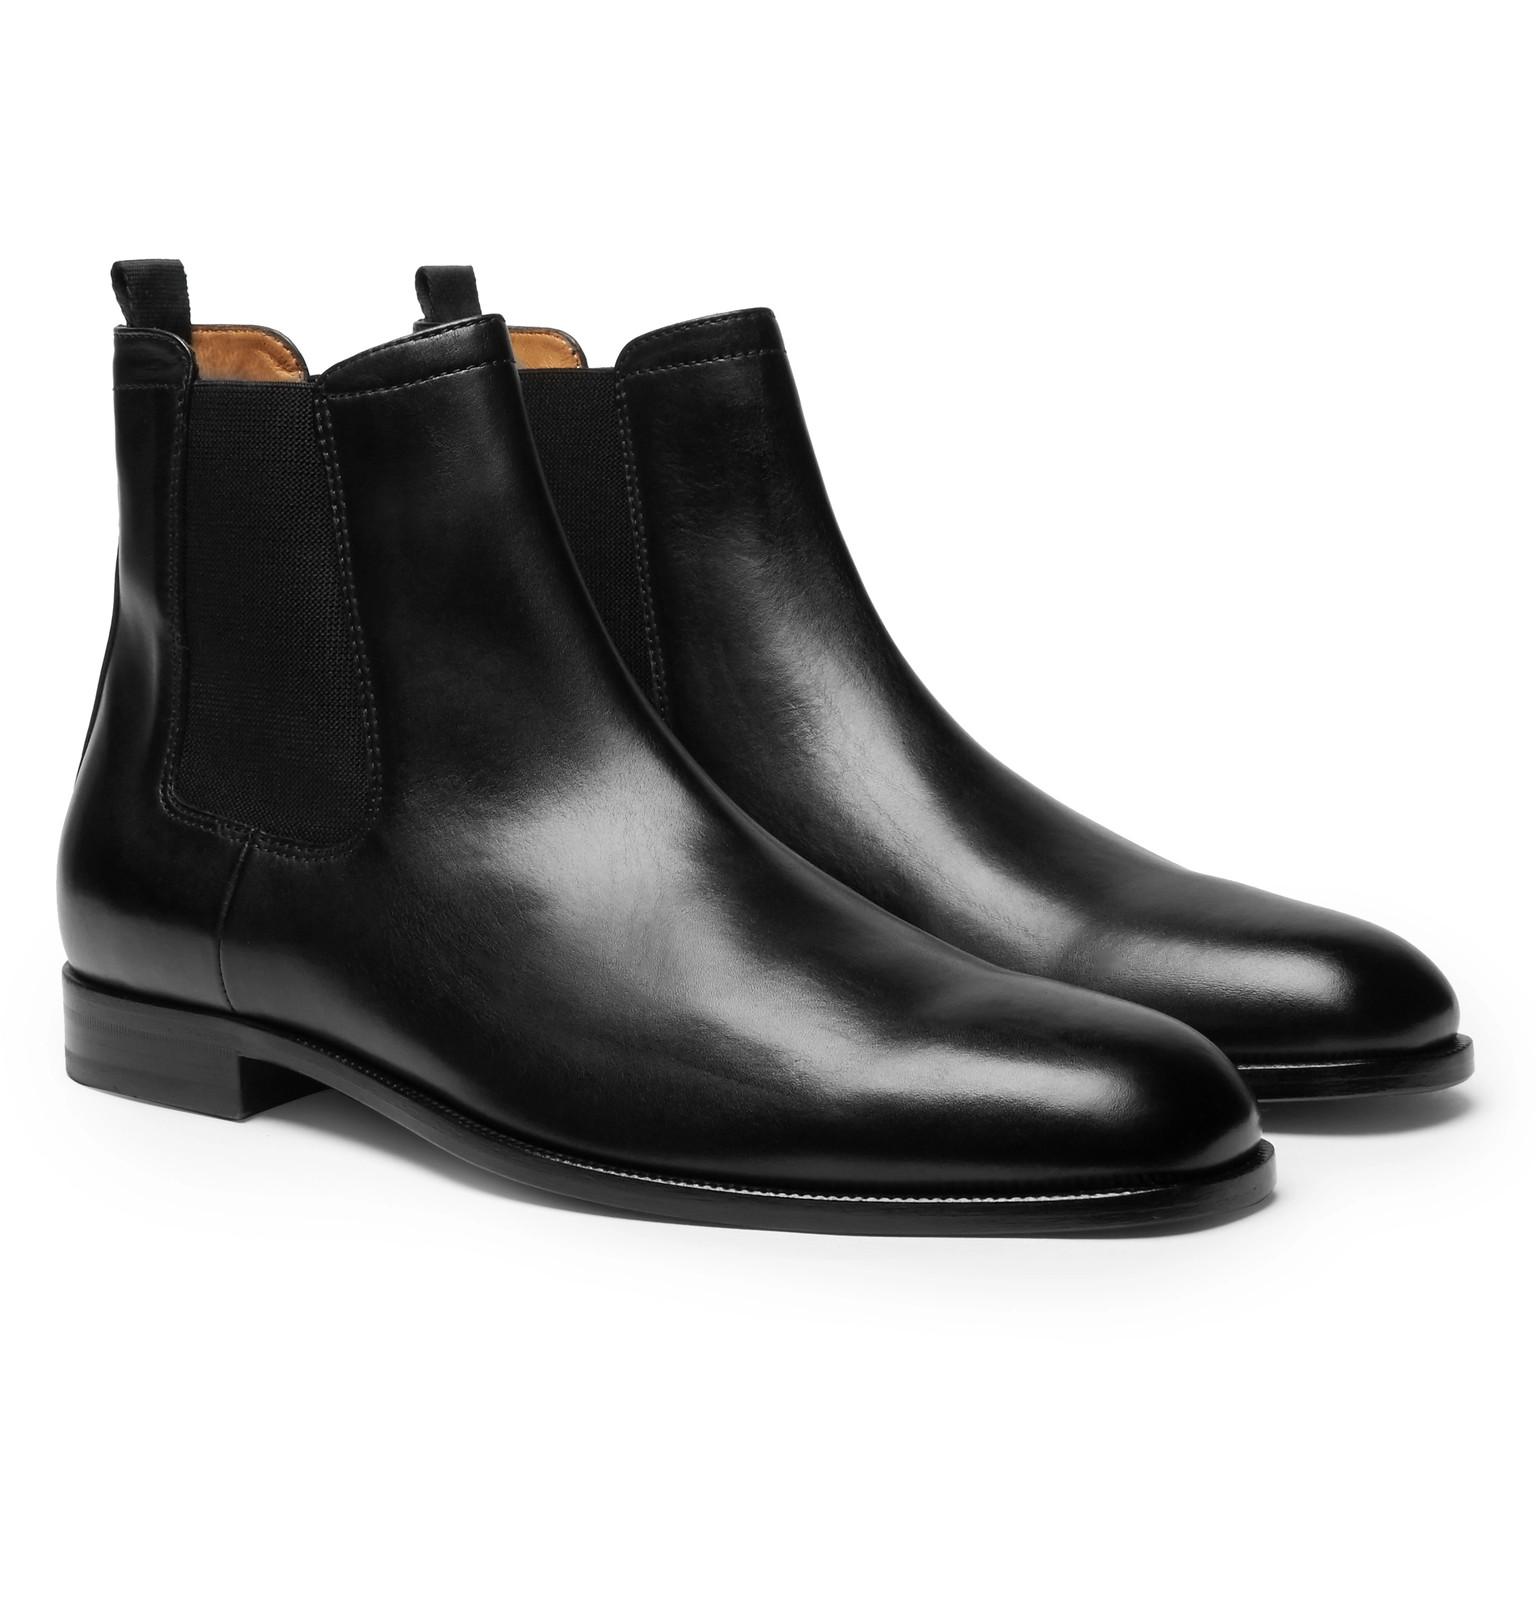 Hugo Boss Leather Chelsea Boots | vlr.eng.br